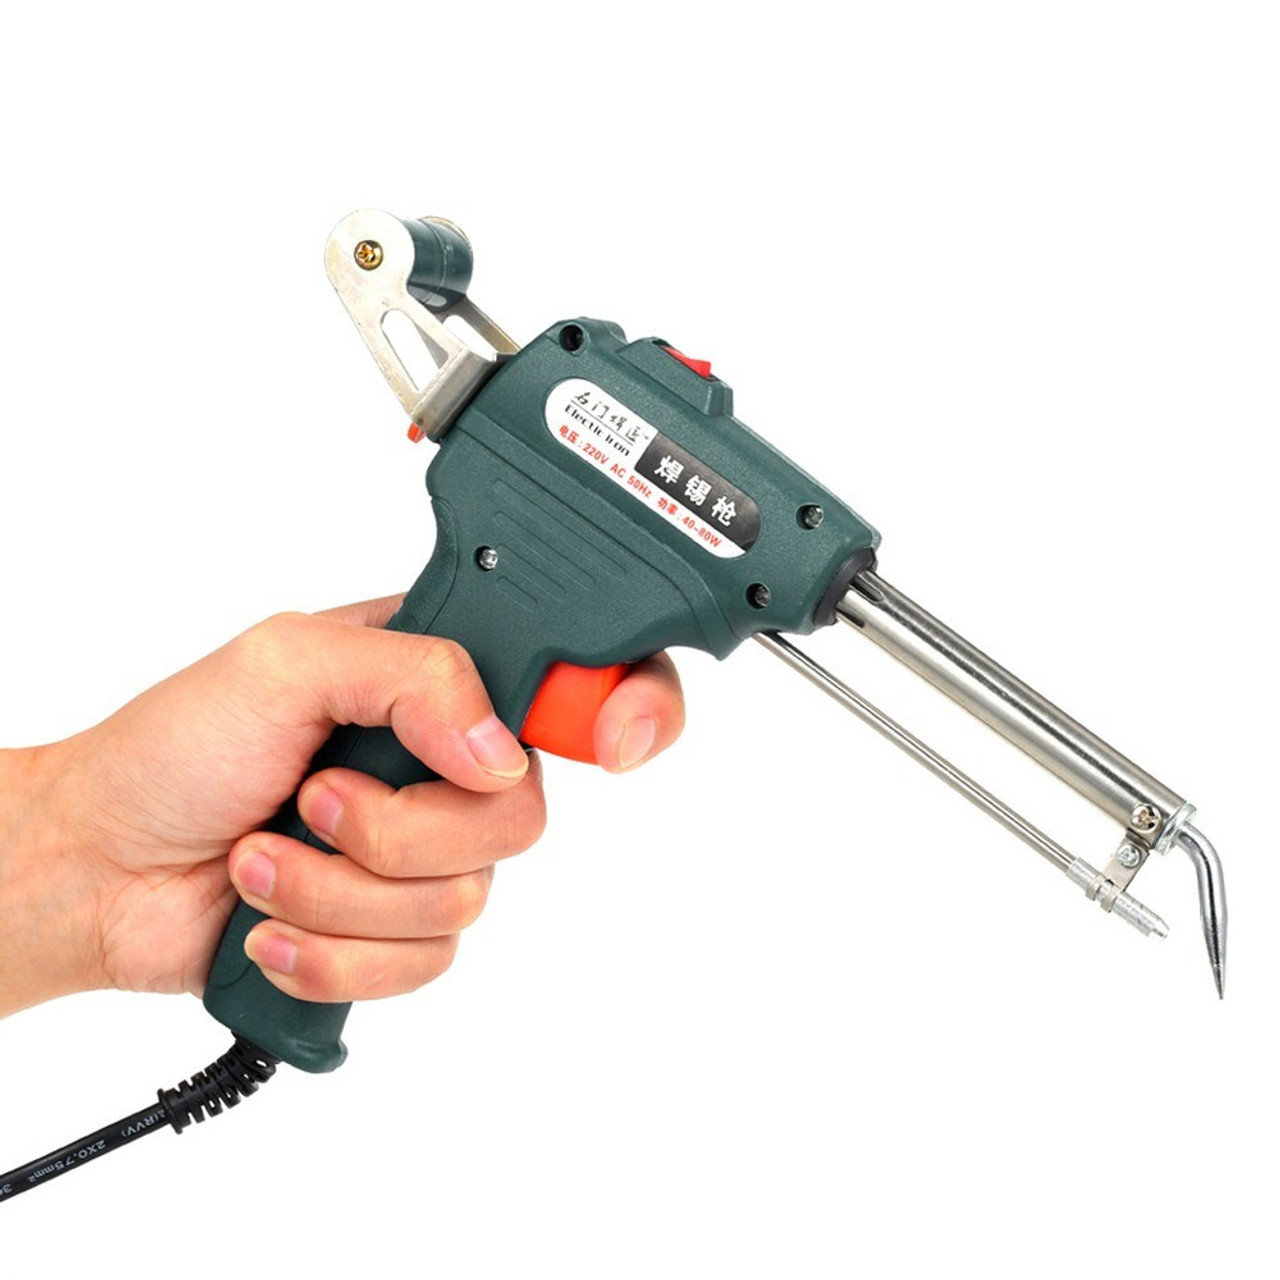 ALE250 - Automatic-Feed Soldering Iron